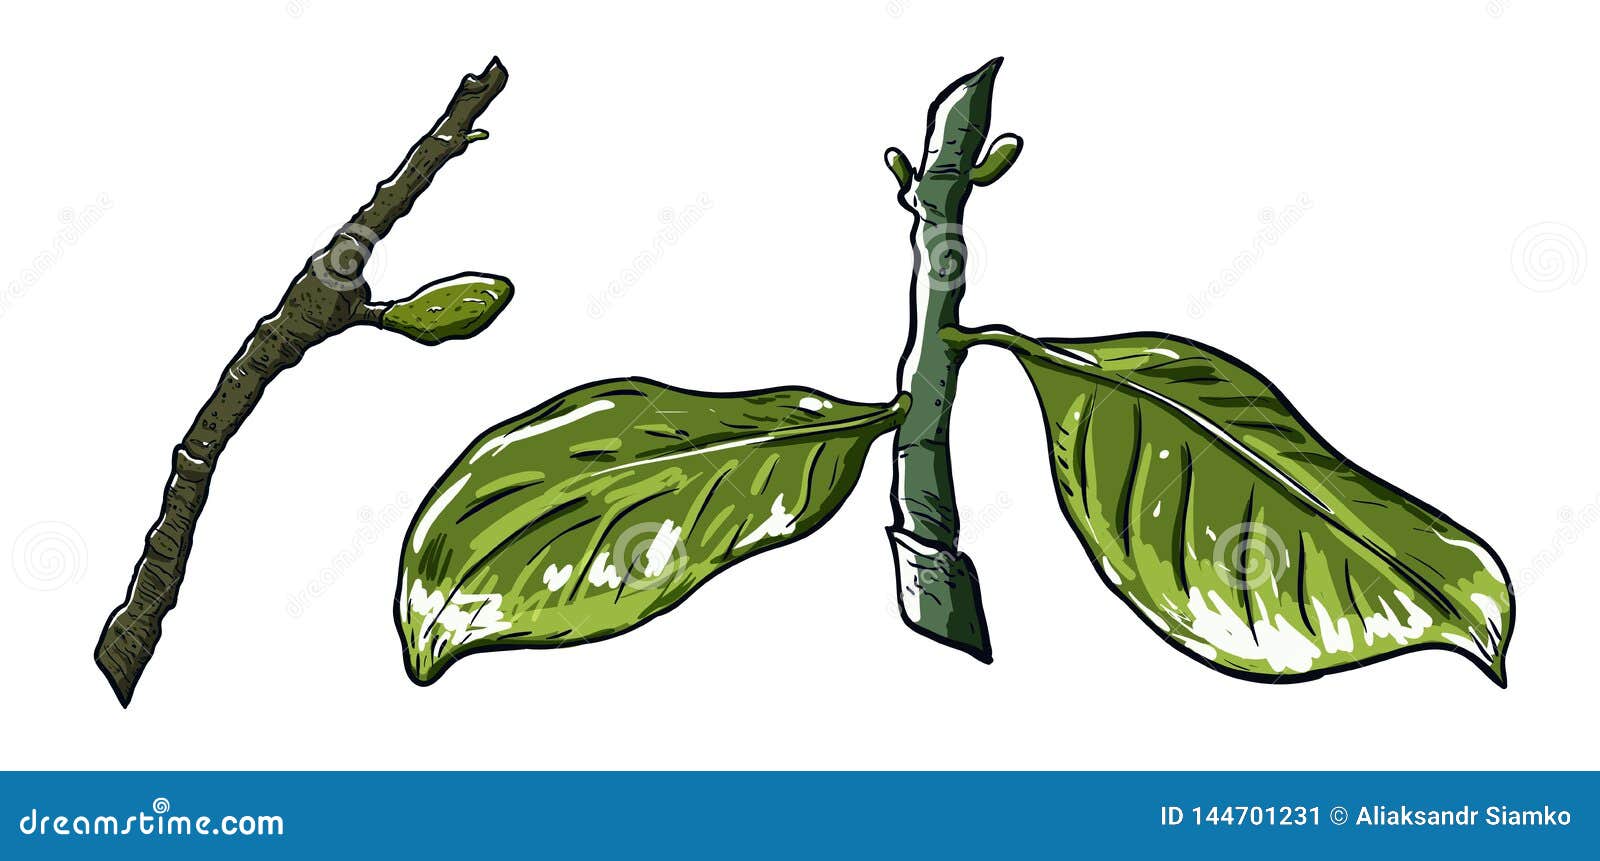 How To Draw Tree Branches with Leaves - YouTube